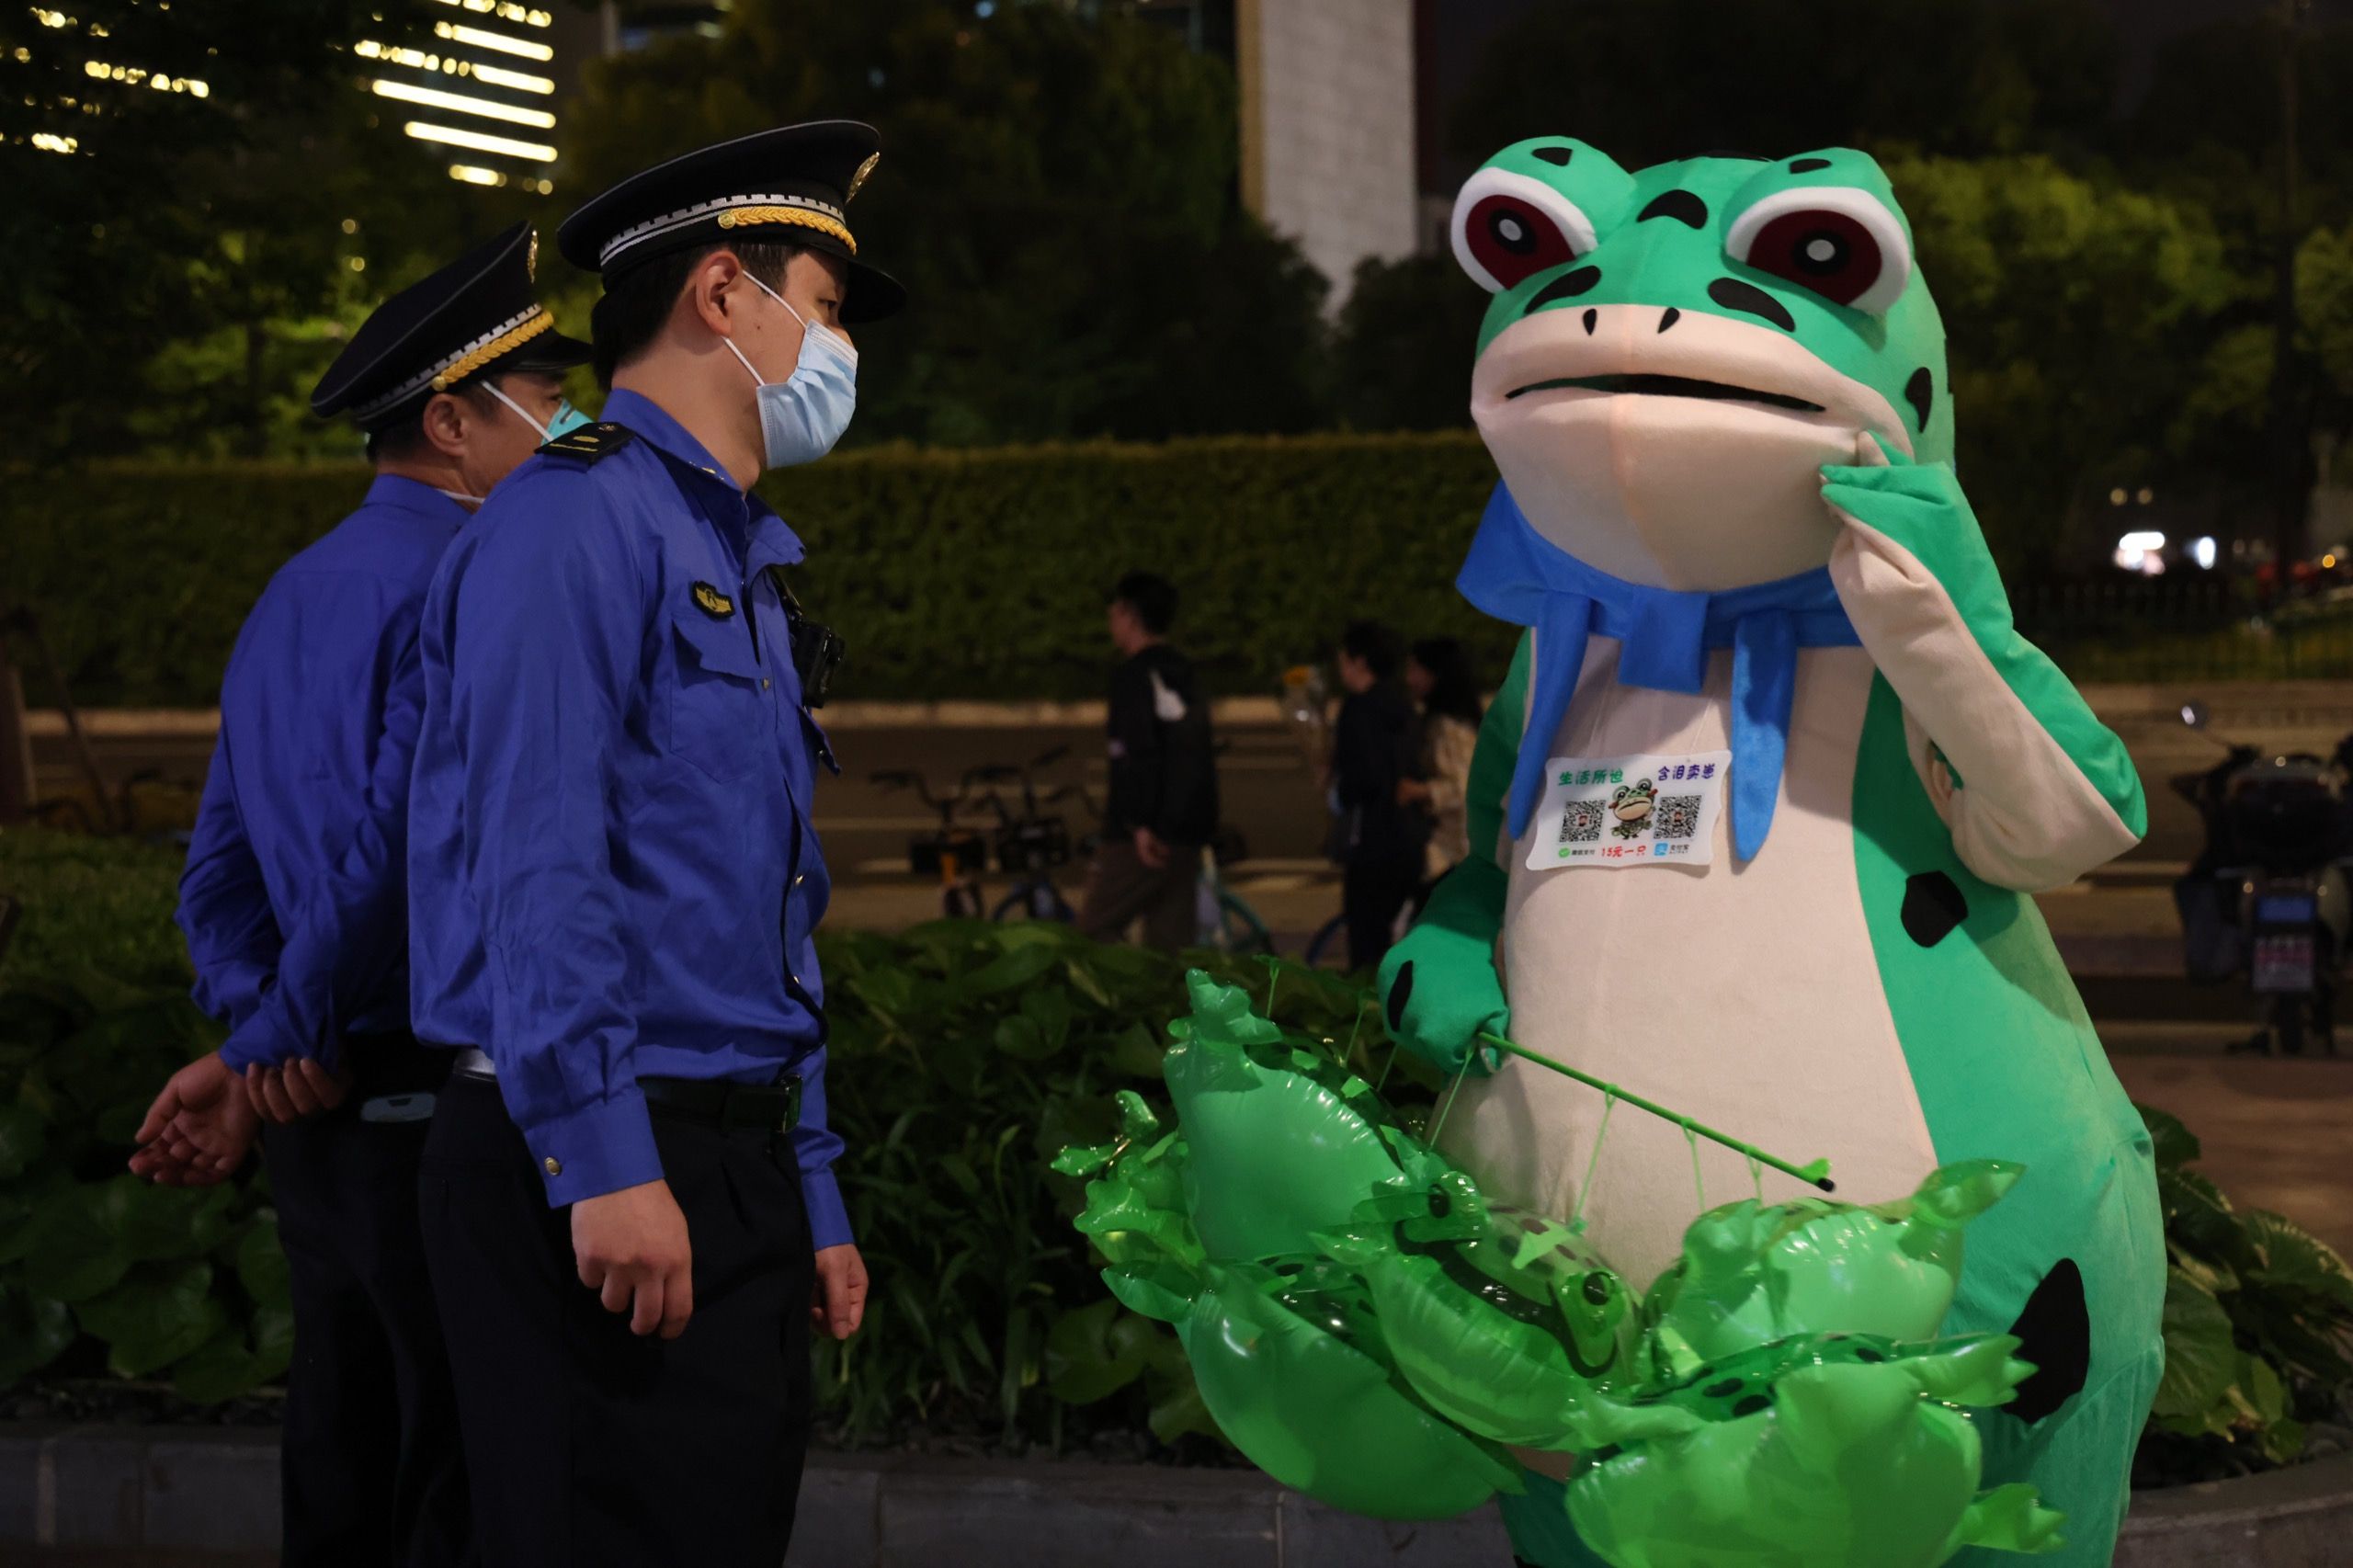 China’s Frog Craze: Why People in Frog Costumes Invading the Streets